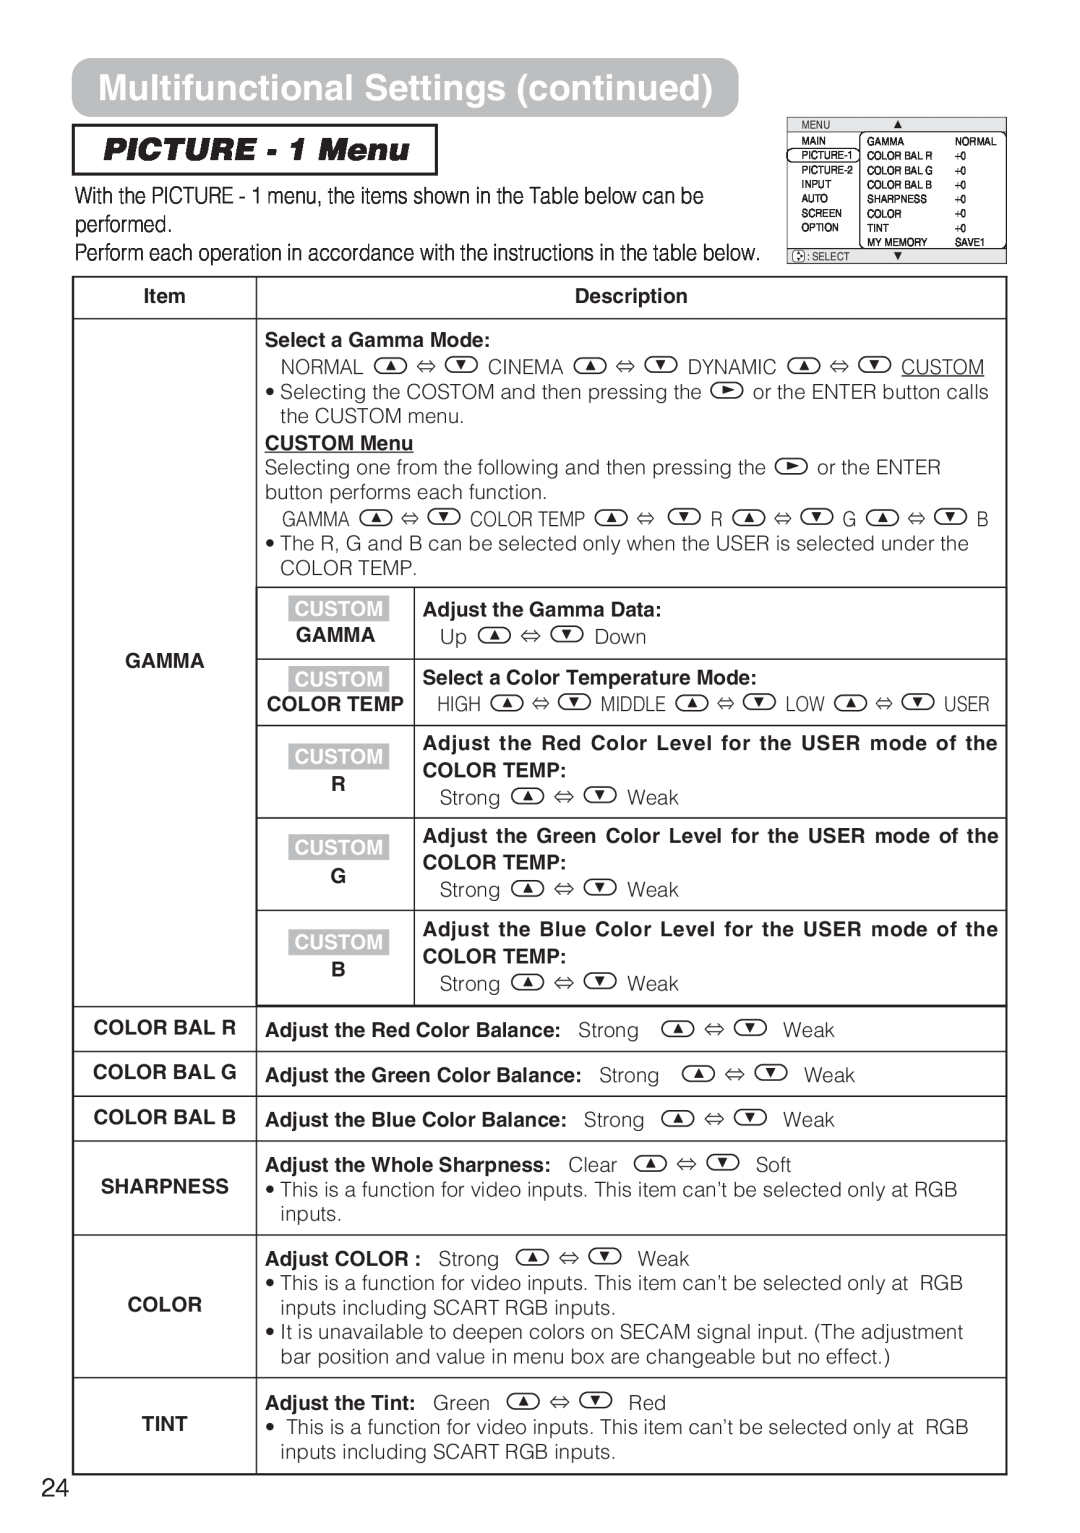 Hitachi CP-S210T, CP-S210F user manual PICTURE - 1 Menu, Multifunctional Settings continued 